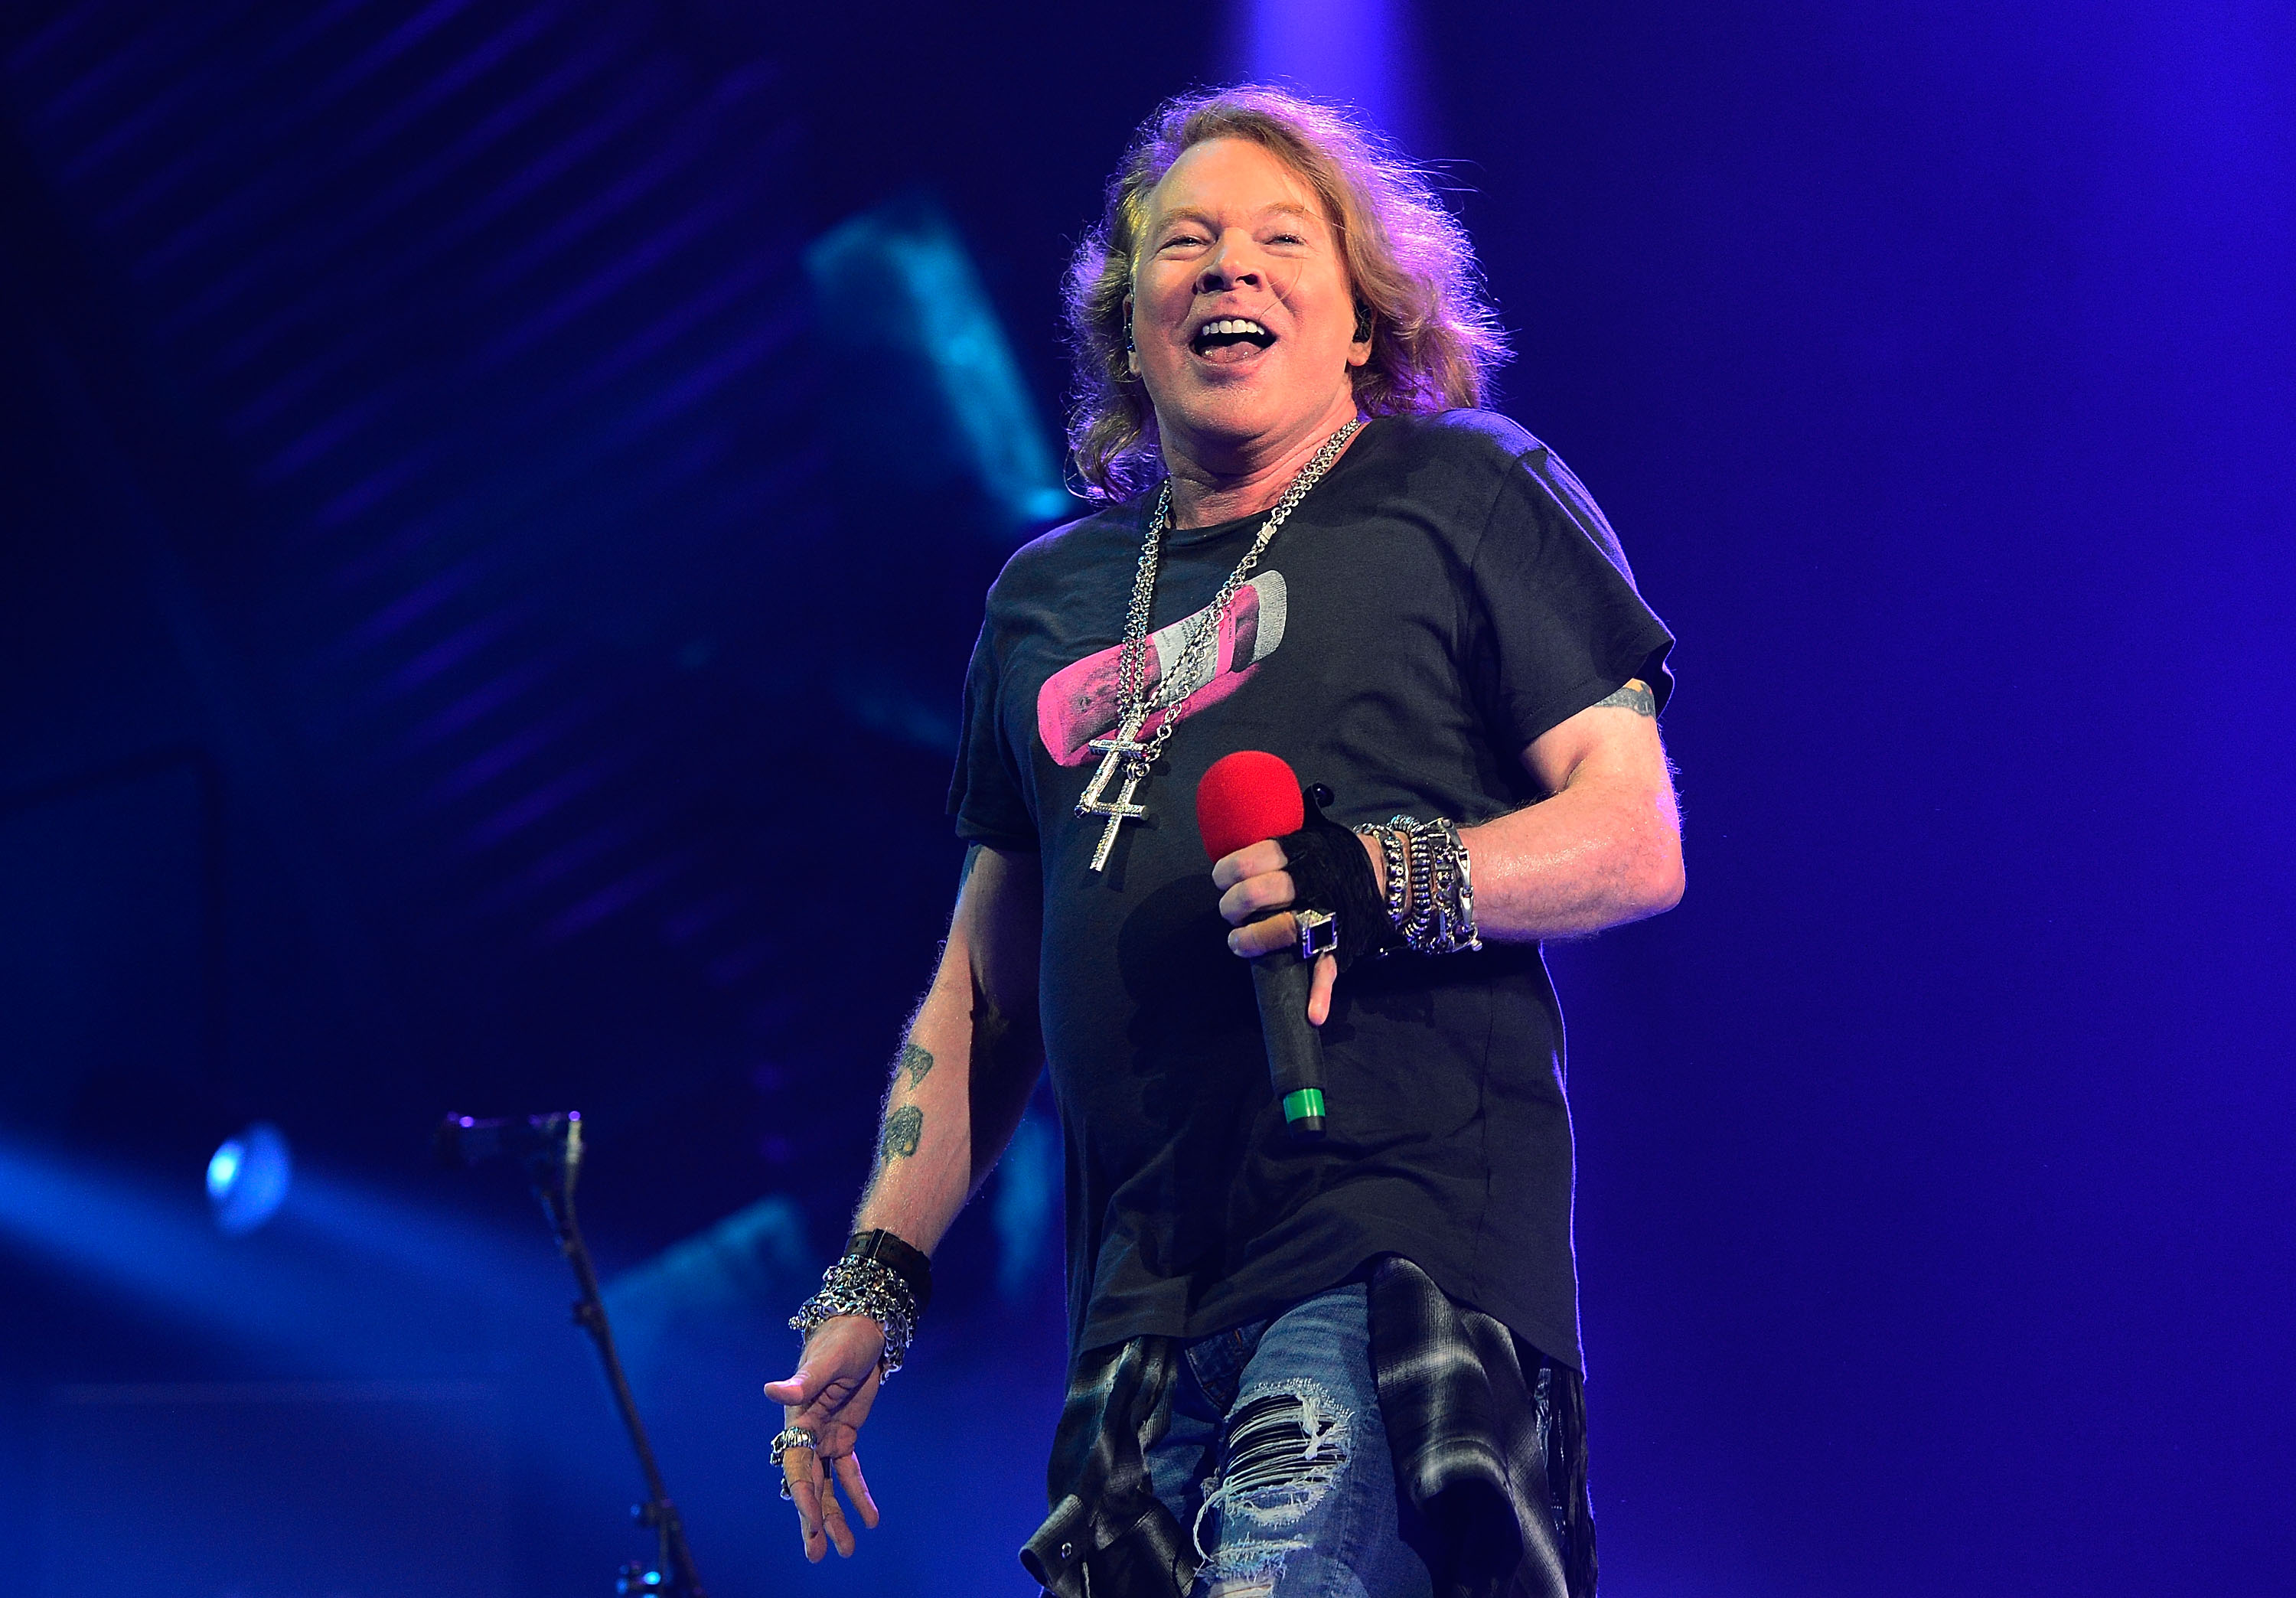 acdc-axl-rose-gettyimages-596732874.jpg